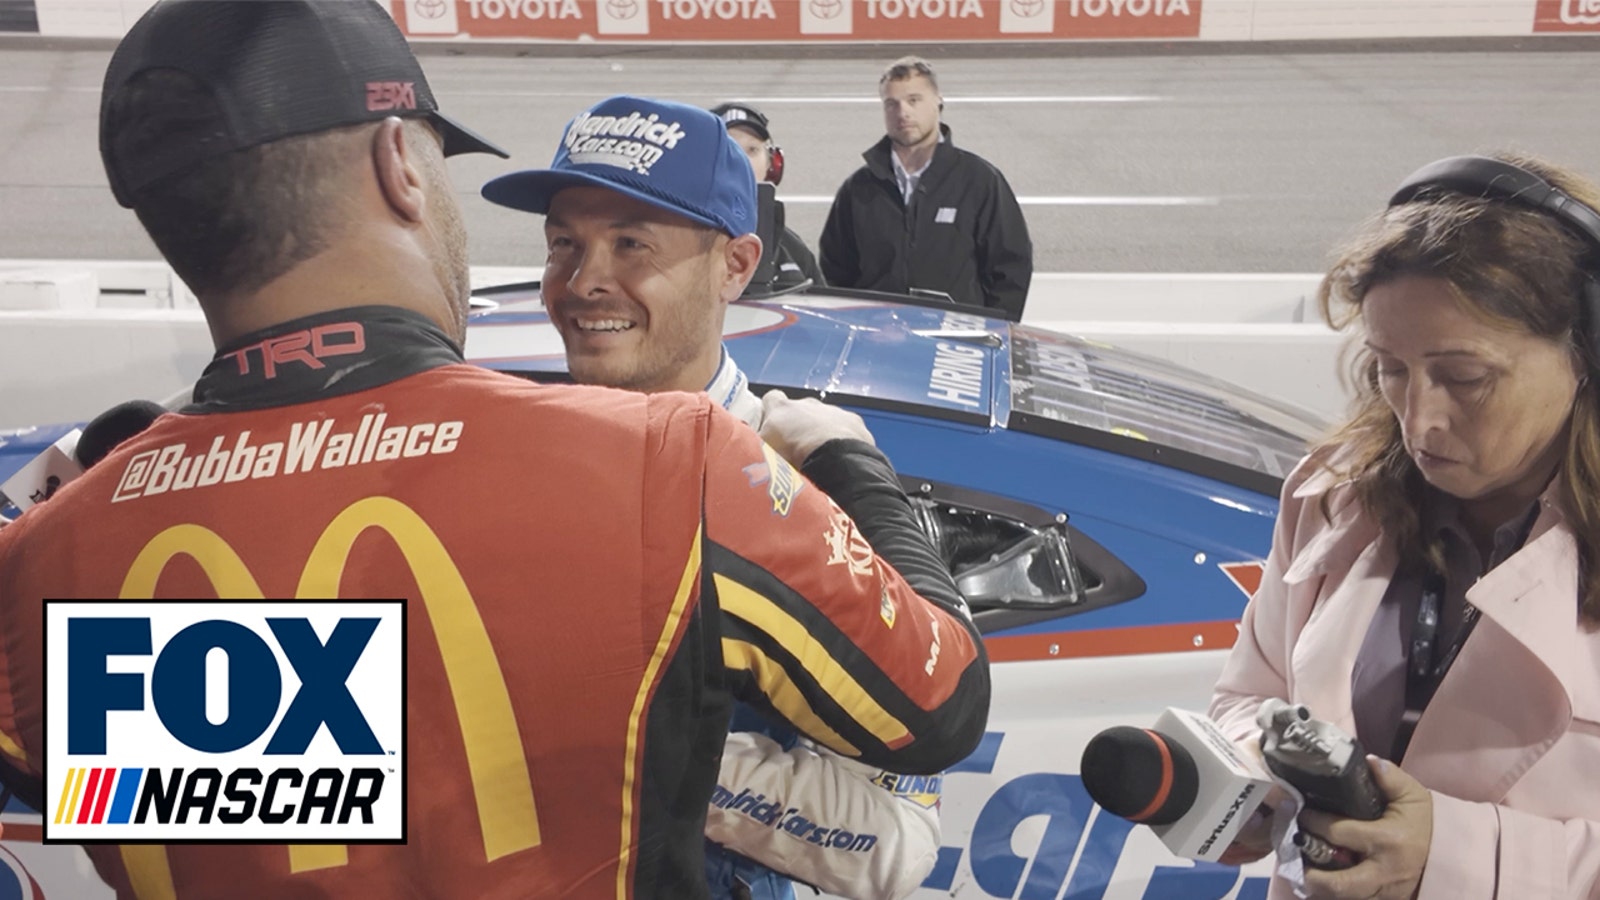 Kyle Larson and Bubba Wallace have a quick chat post-race after battling at Richmond